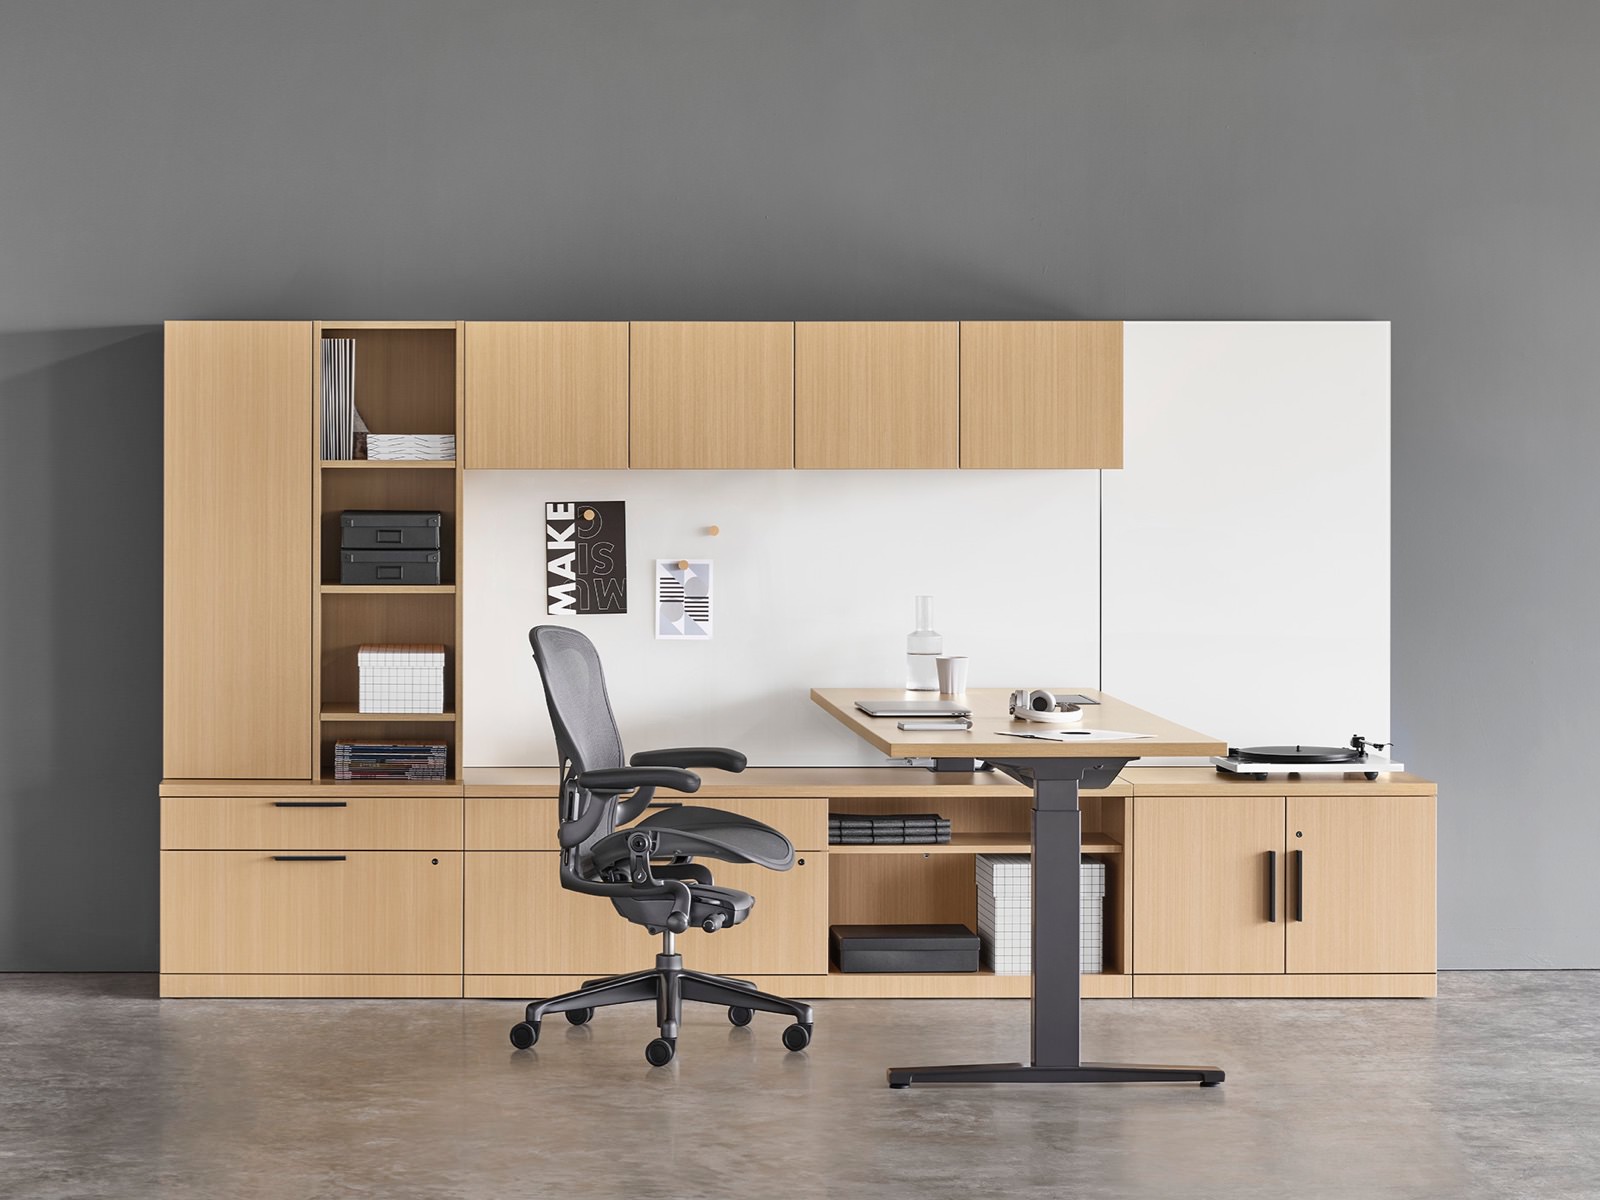 A Canvas Private Office with light wood storage, height adjustable desk, black Aeron chair, and light grey Striad lounge chair.